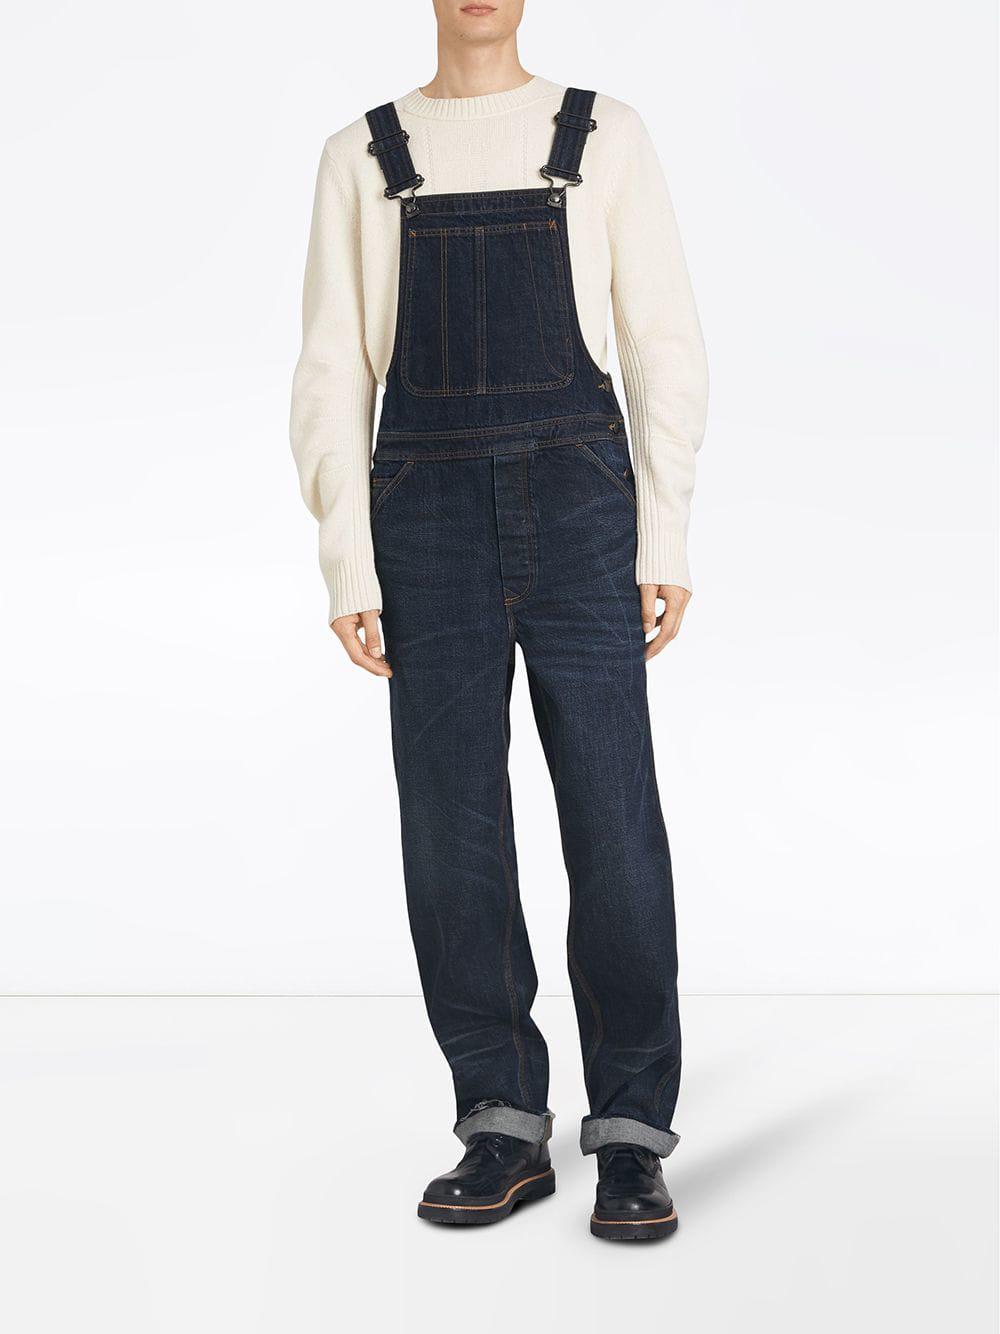 Burberry Overalls in for Men - Lyst